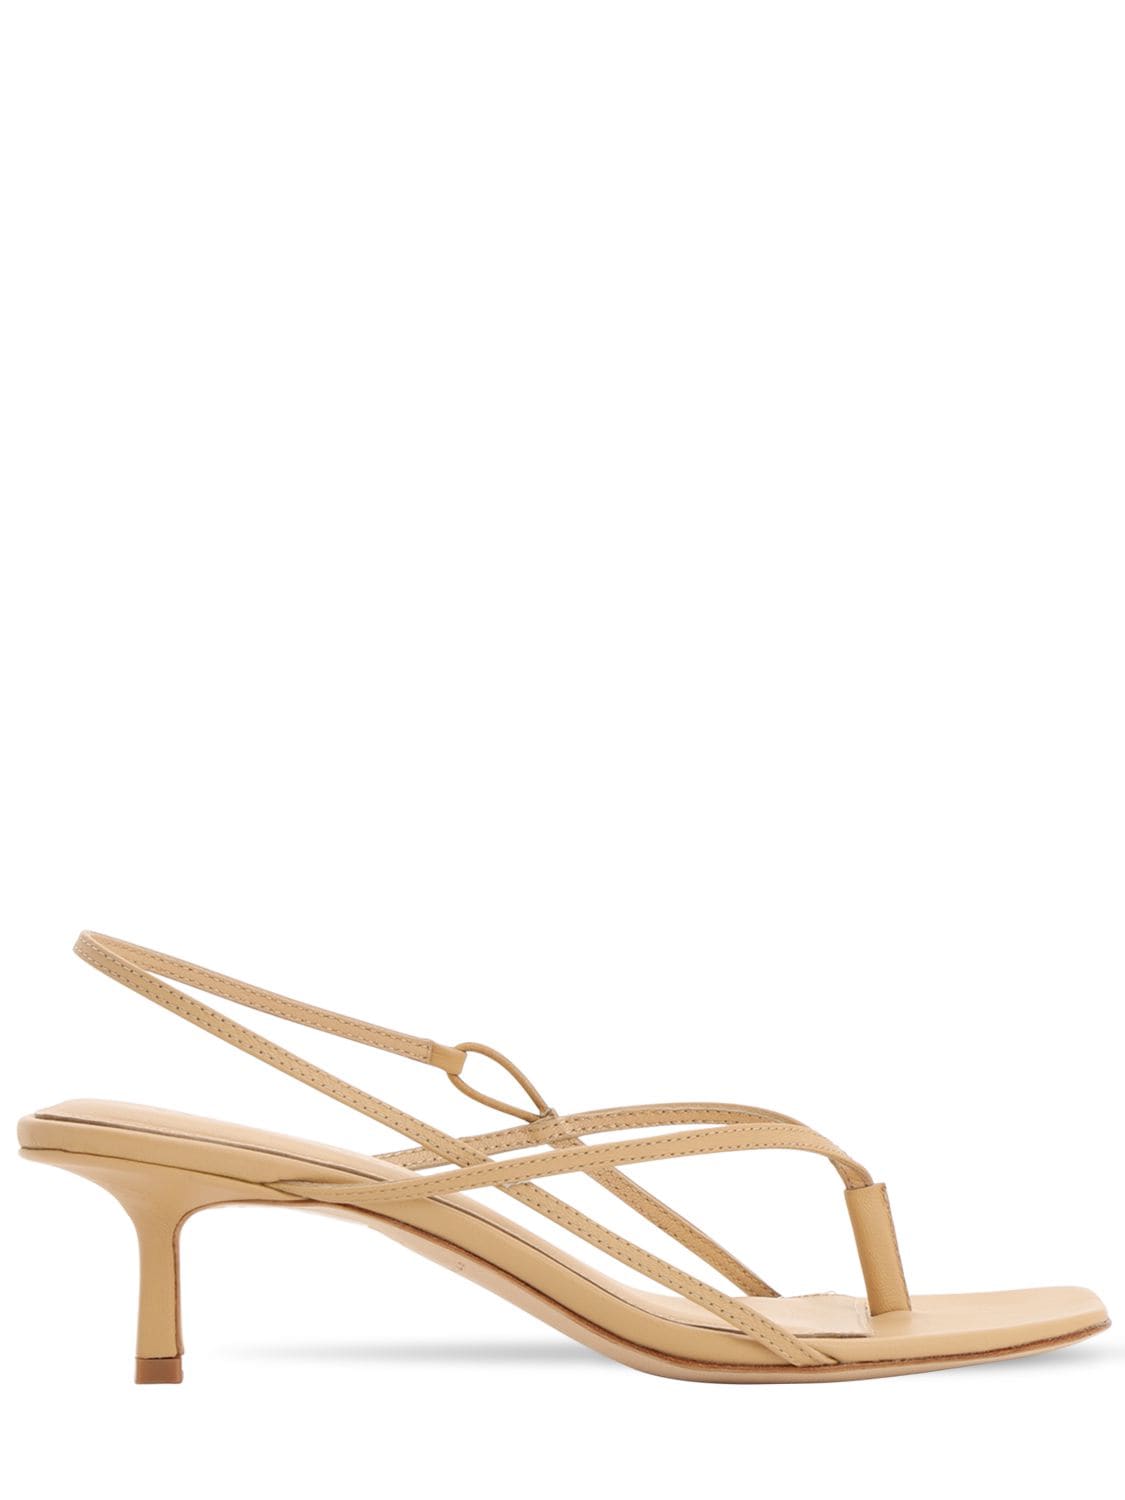 Studio Amelia 50mm Leather Thong Sling Back Sandals In Nude